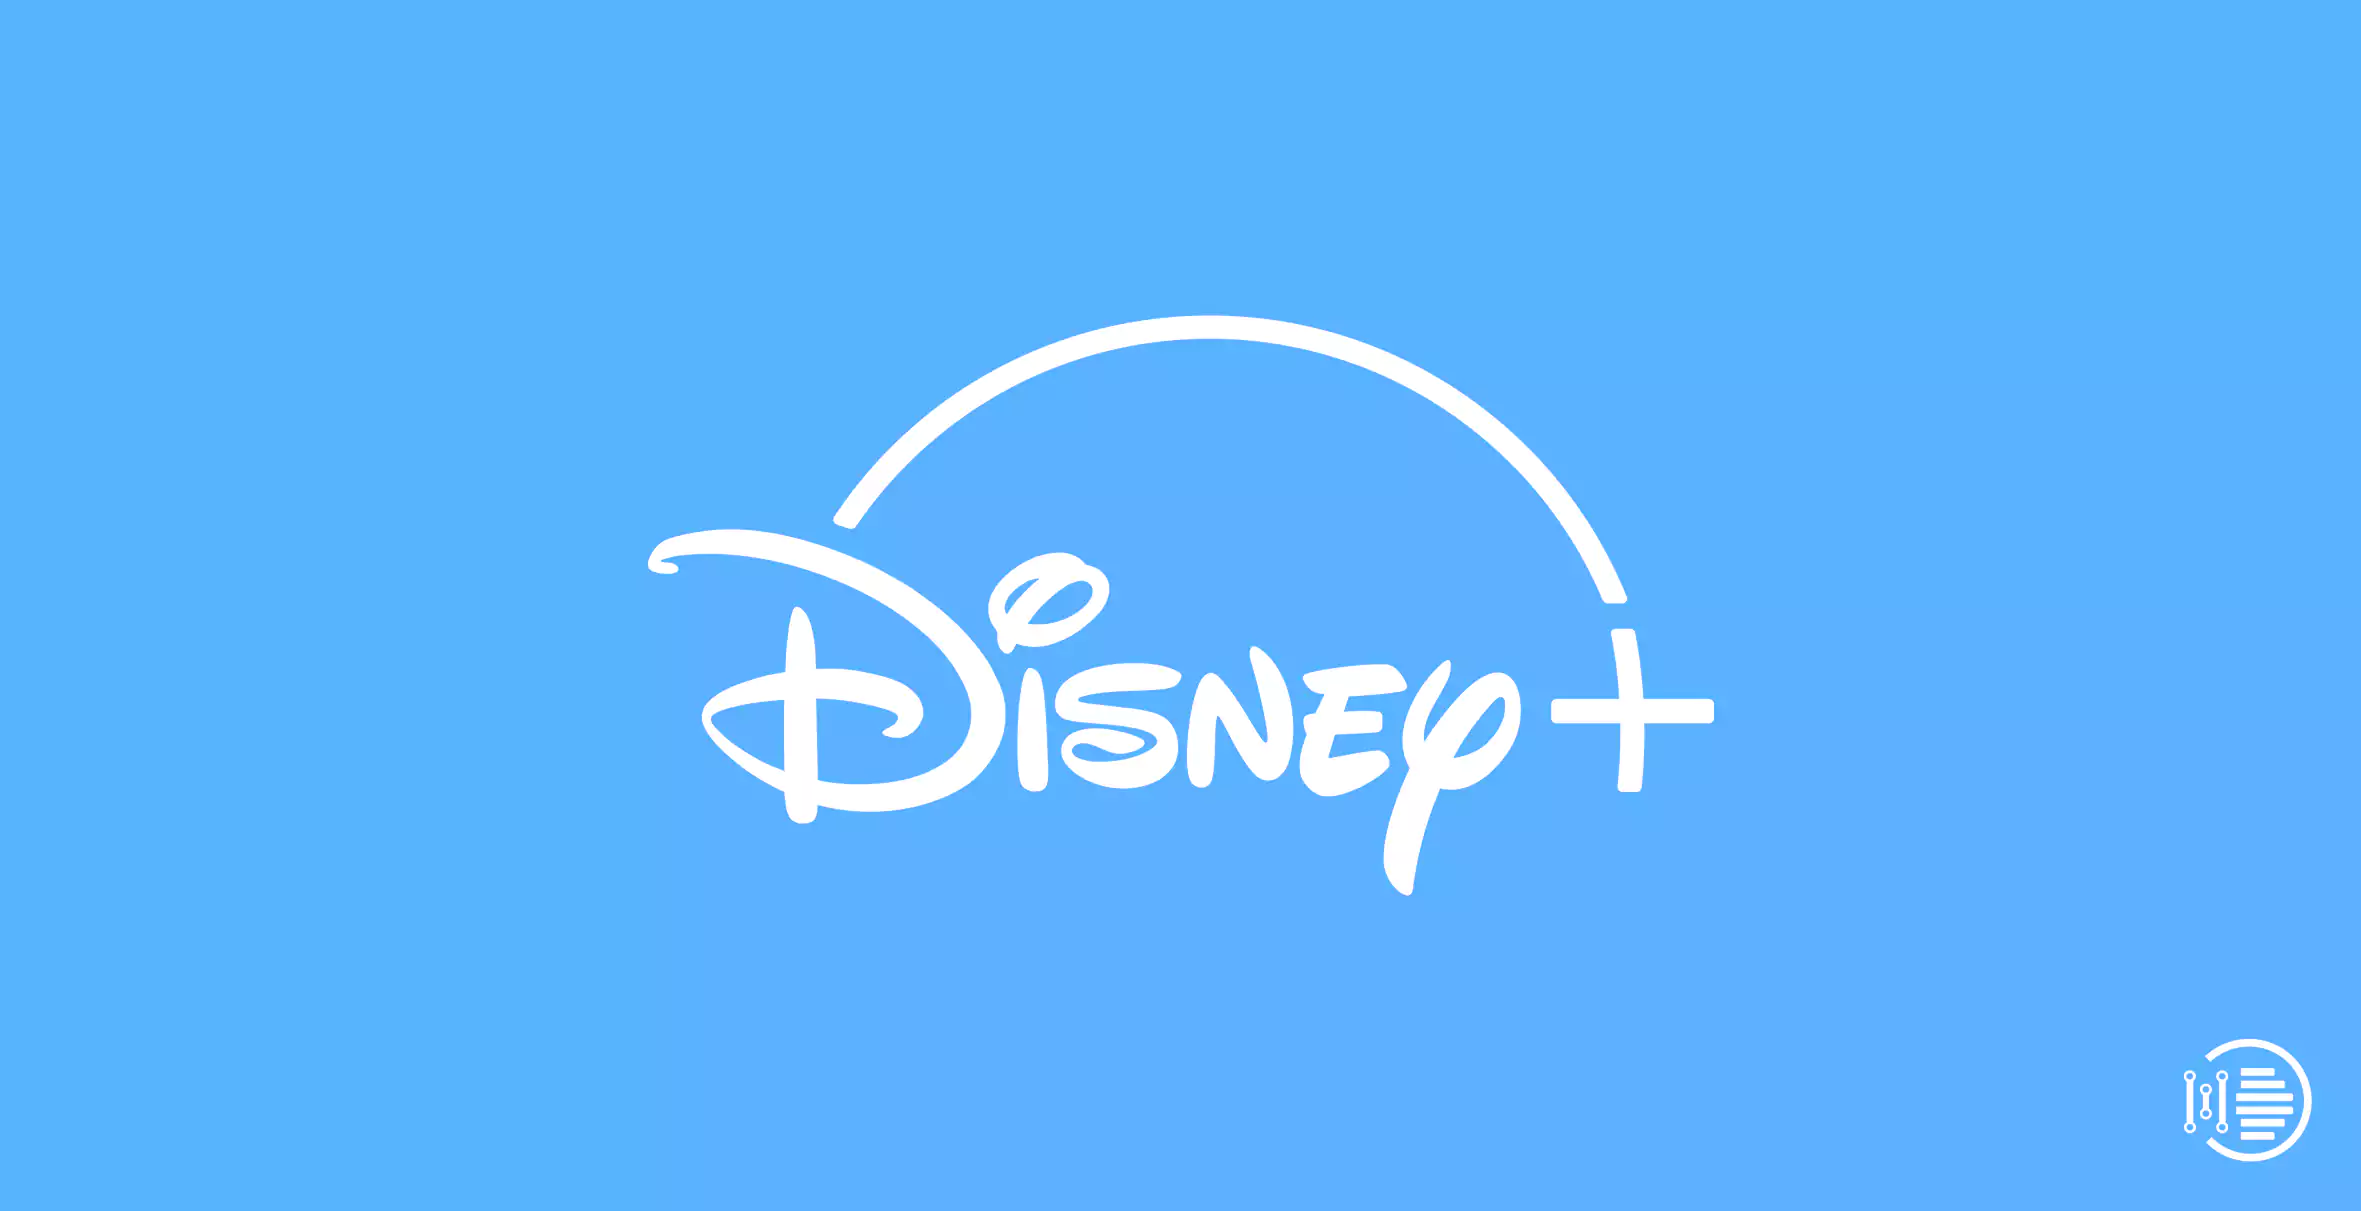 What is Disney+